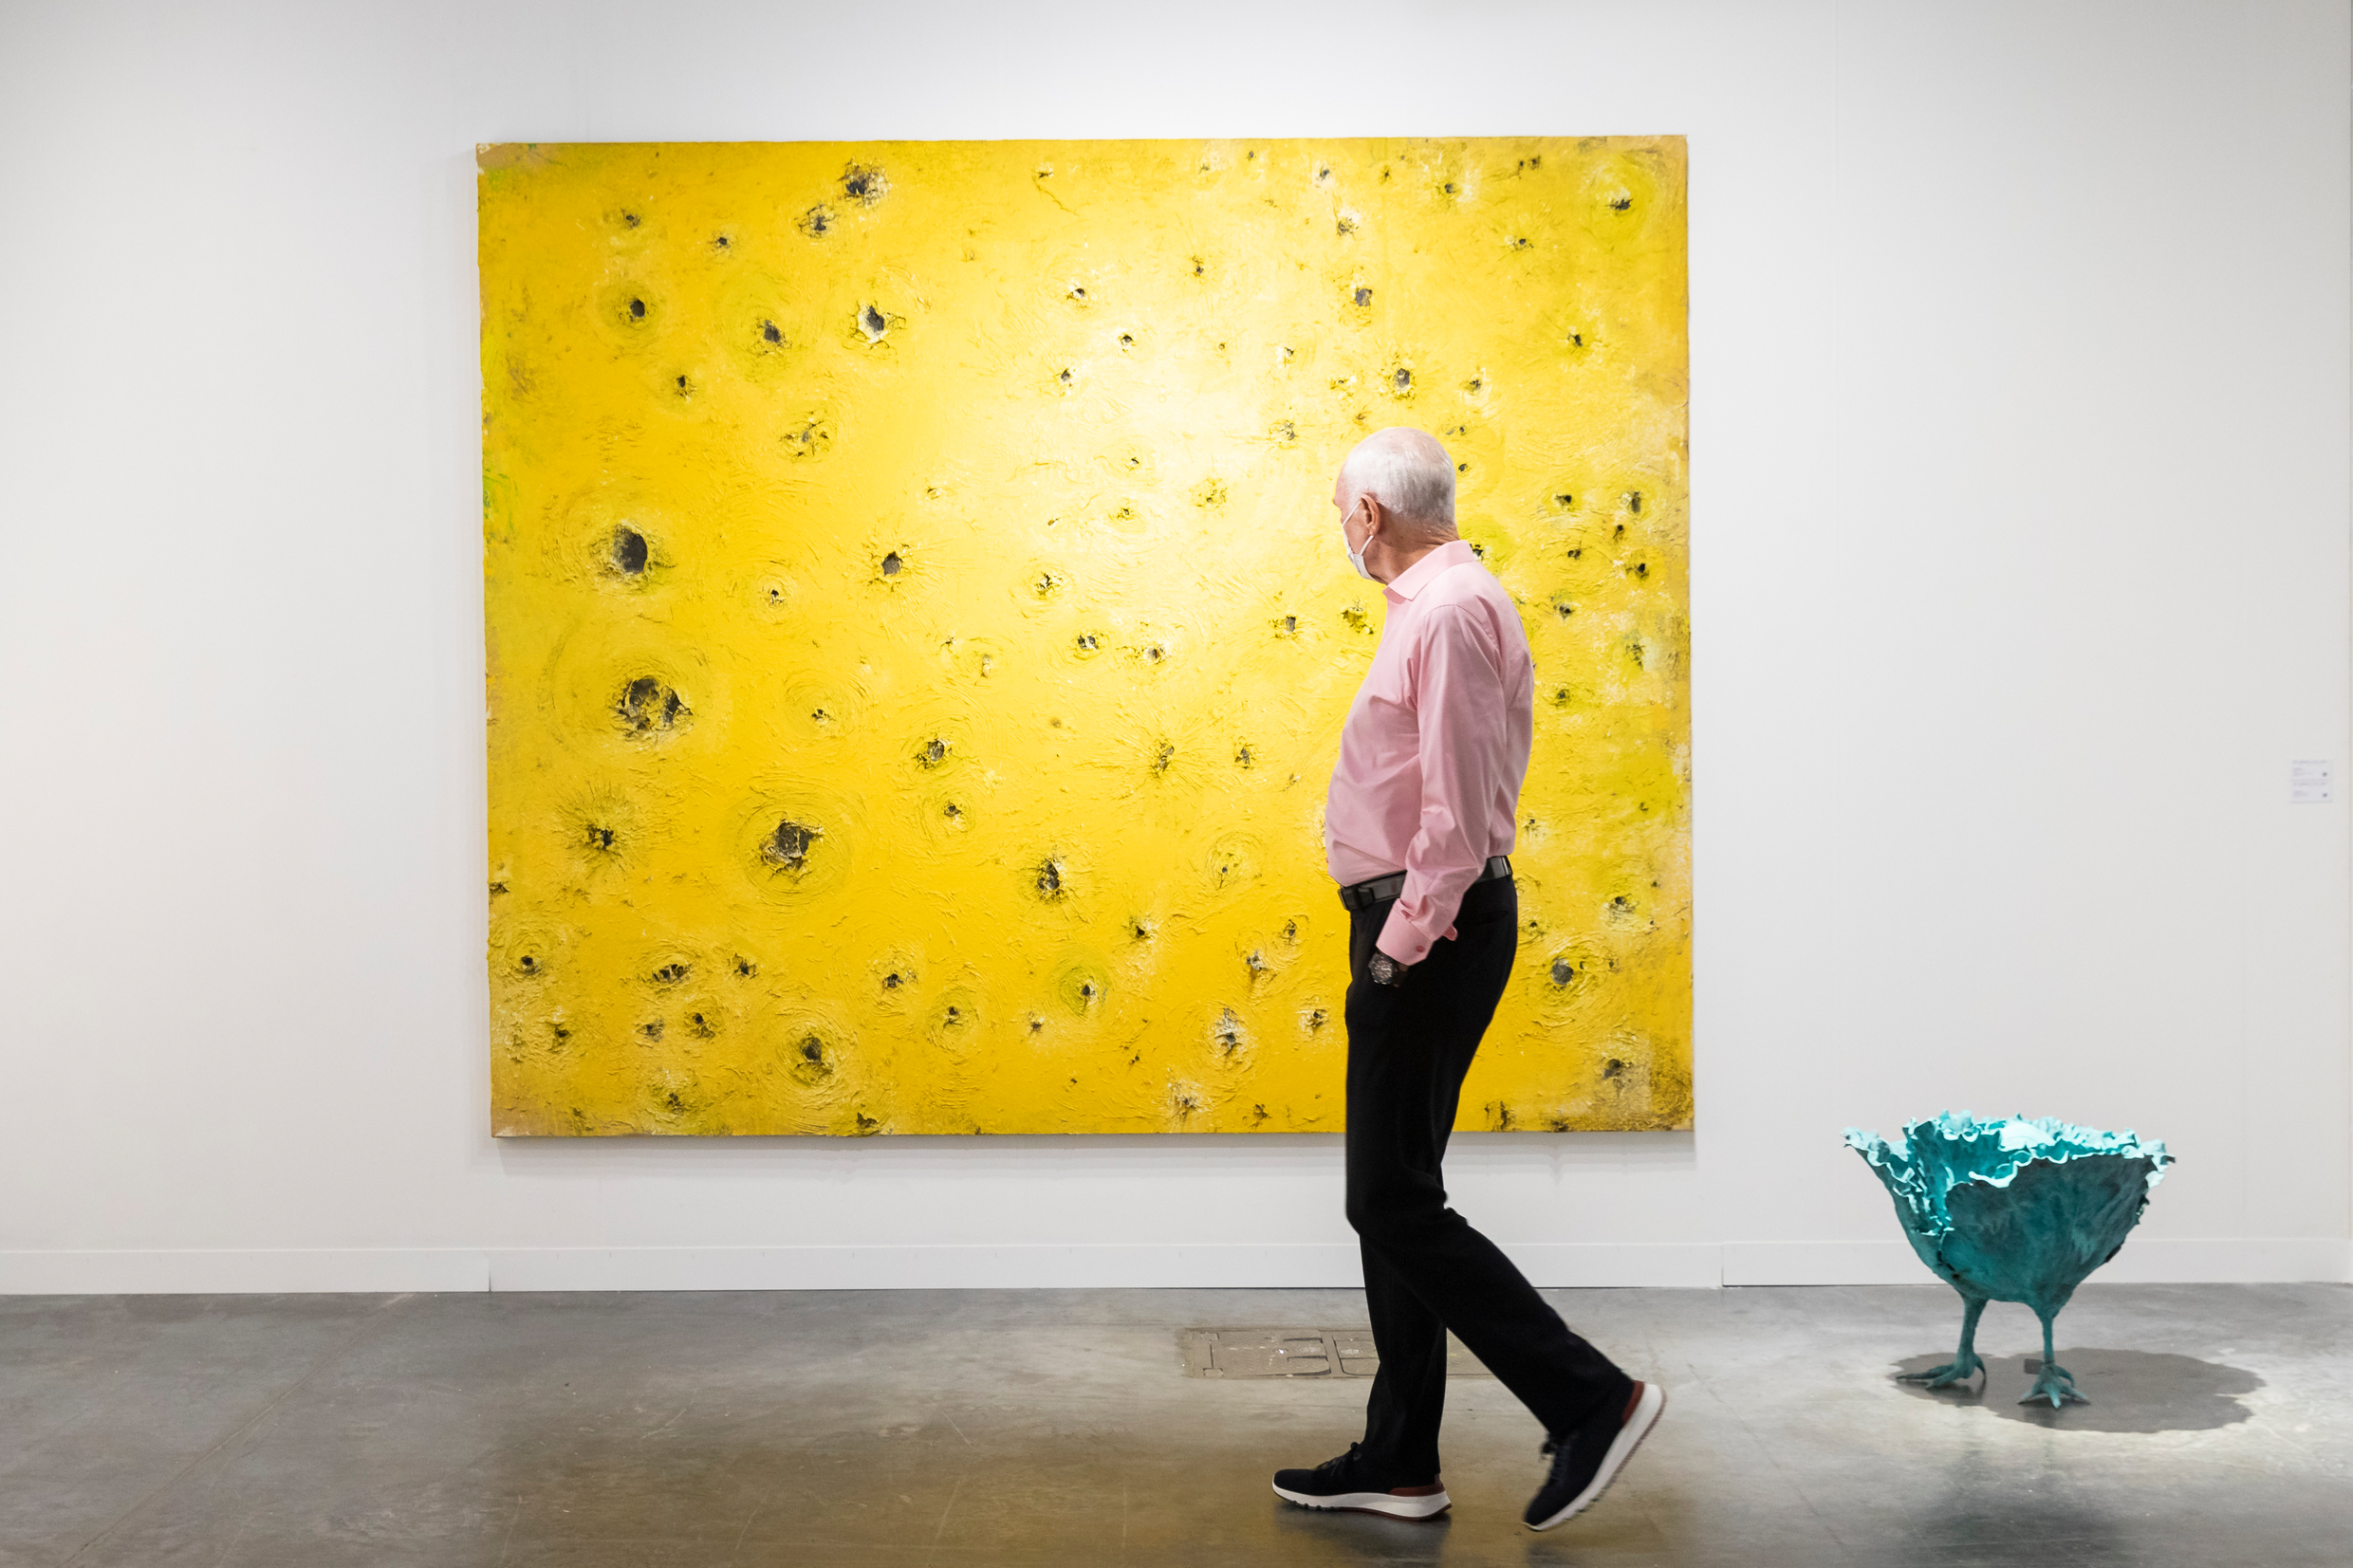 A man wearing a mask walks by a large yellow painting with black textured craters at Art Basel Miami Beach in 2021.